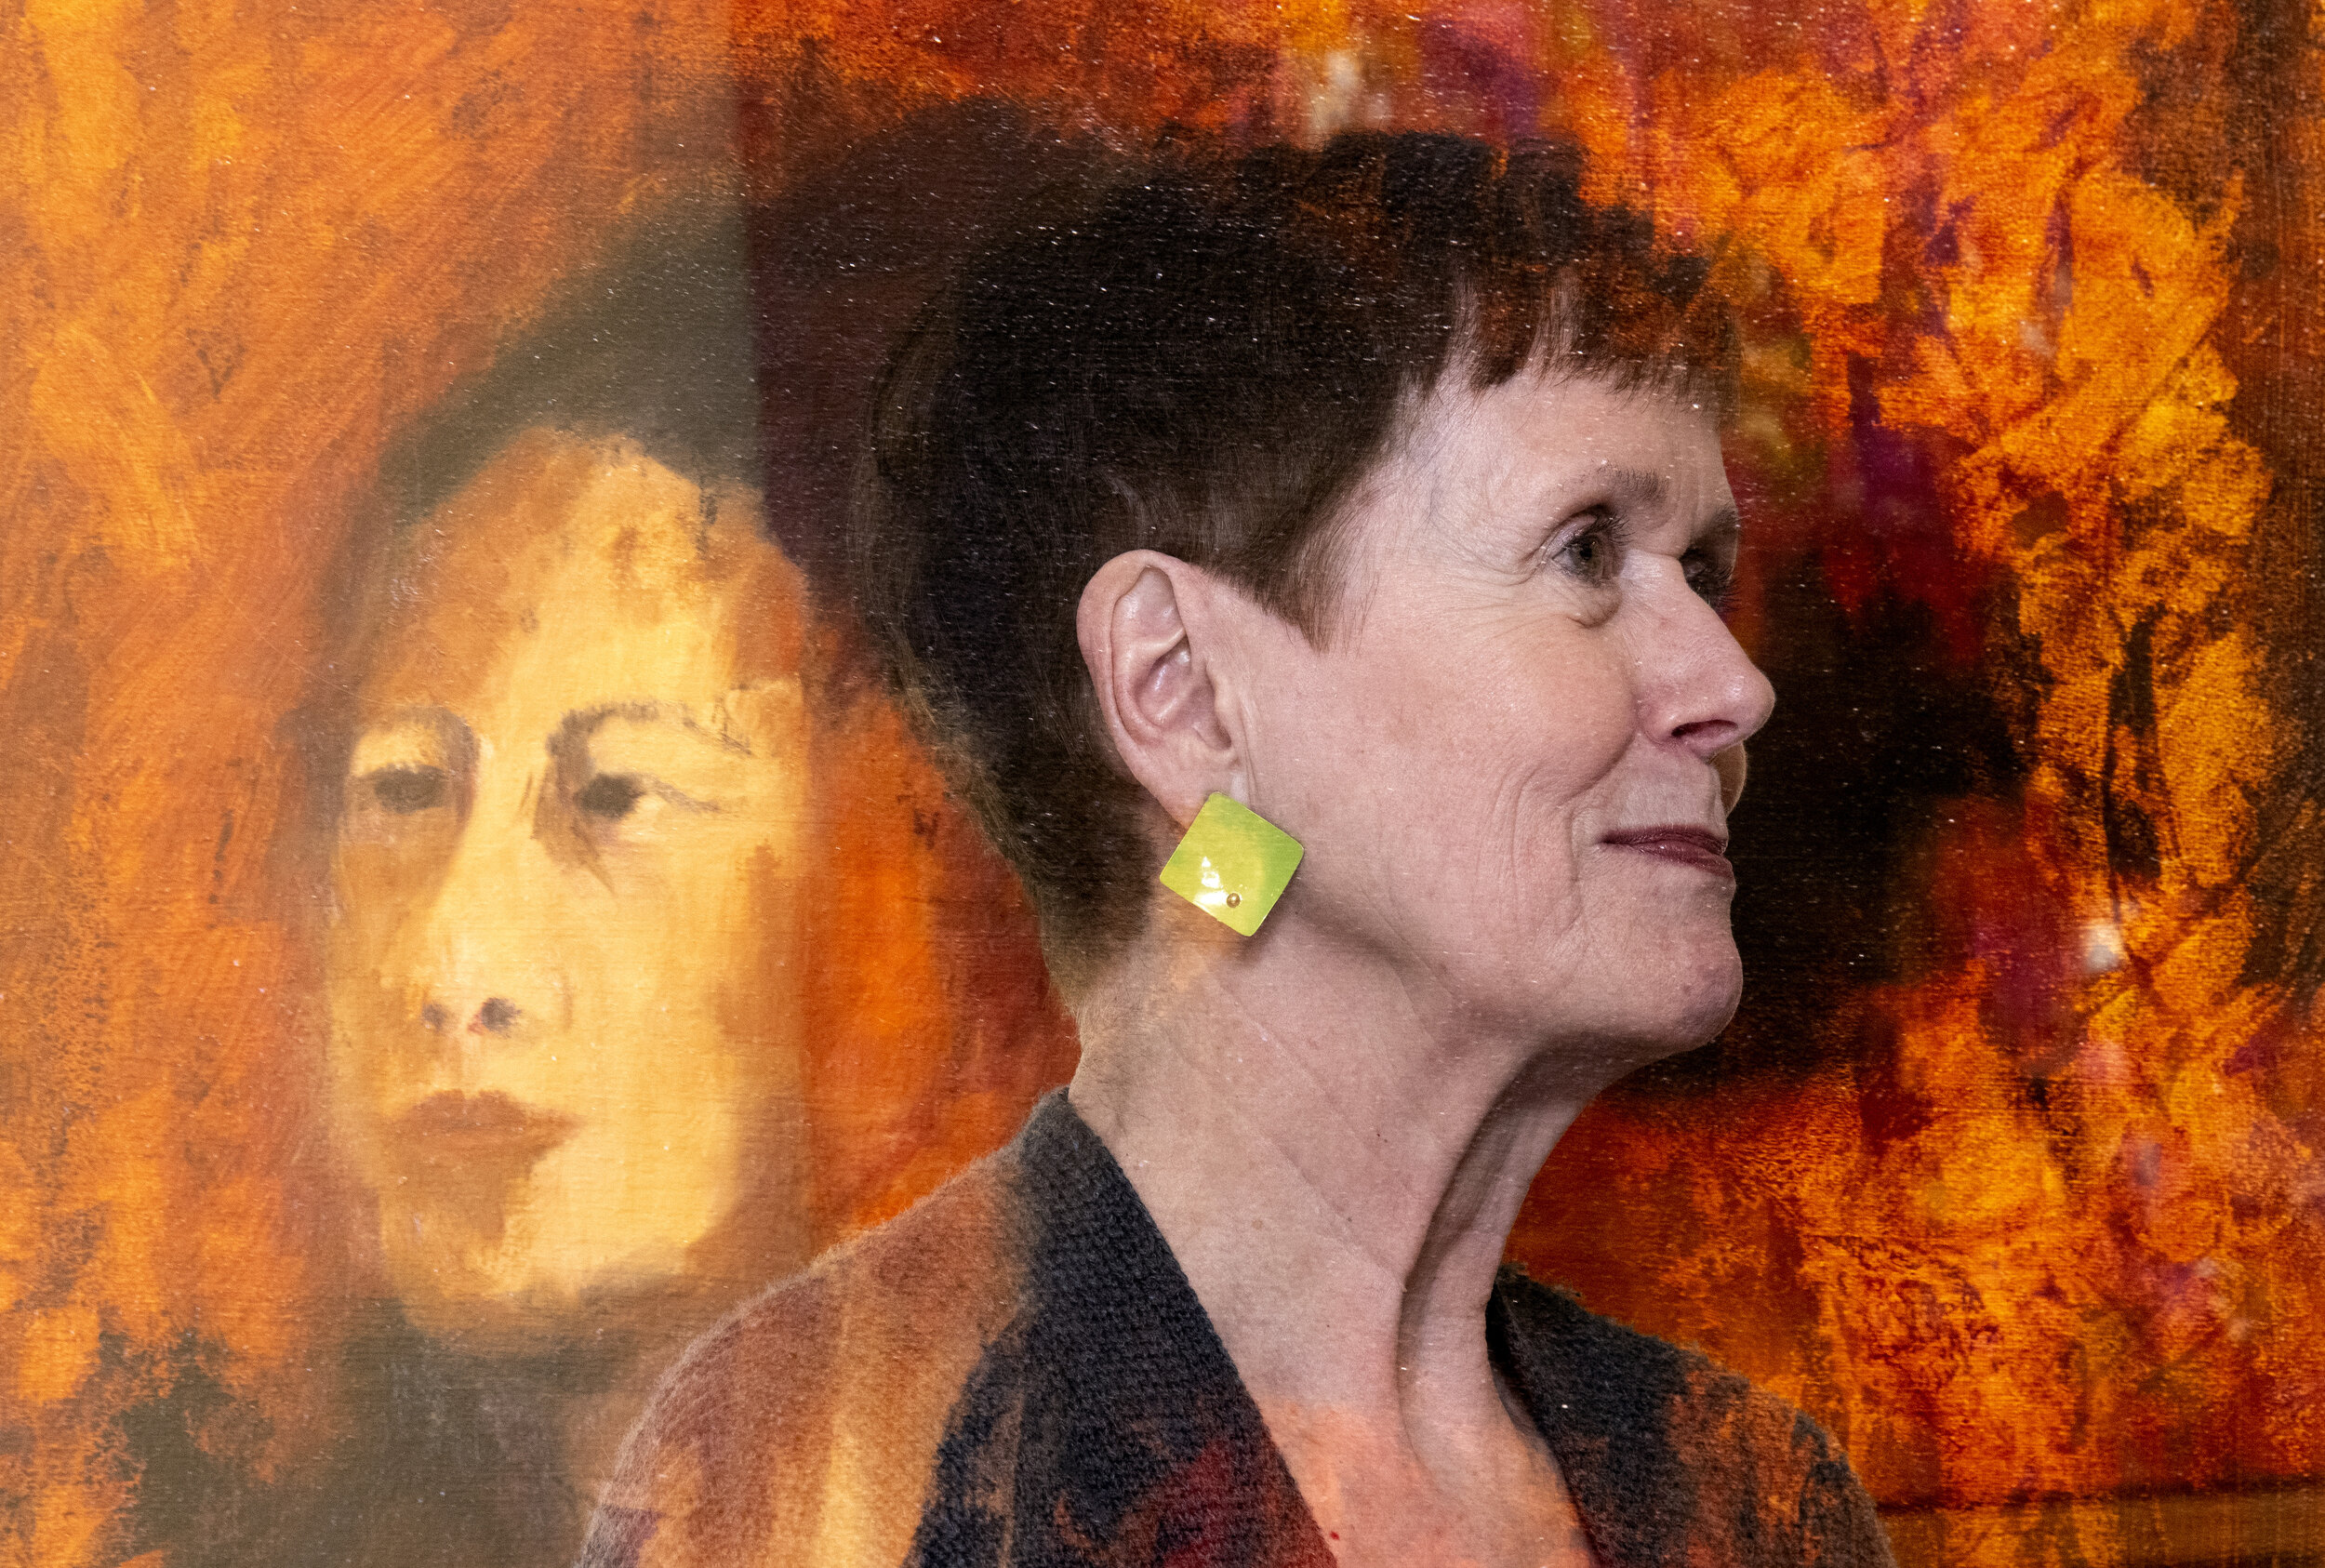  In this double-exposure portrait, local artist Caroline Thompson, originally of Kennett, Missouri, and now Cape Girardeau, is seen with one of her paintings of a model from an art class Tuesday, March 19, 2019, at Thompson's home in Cape Girardeau, 